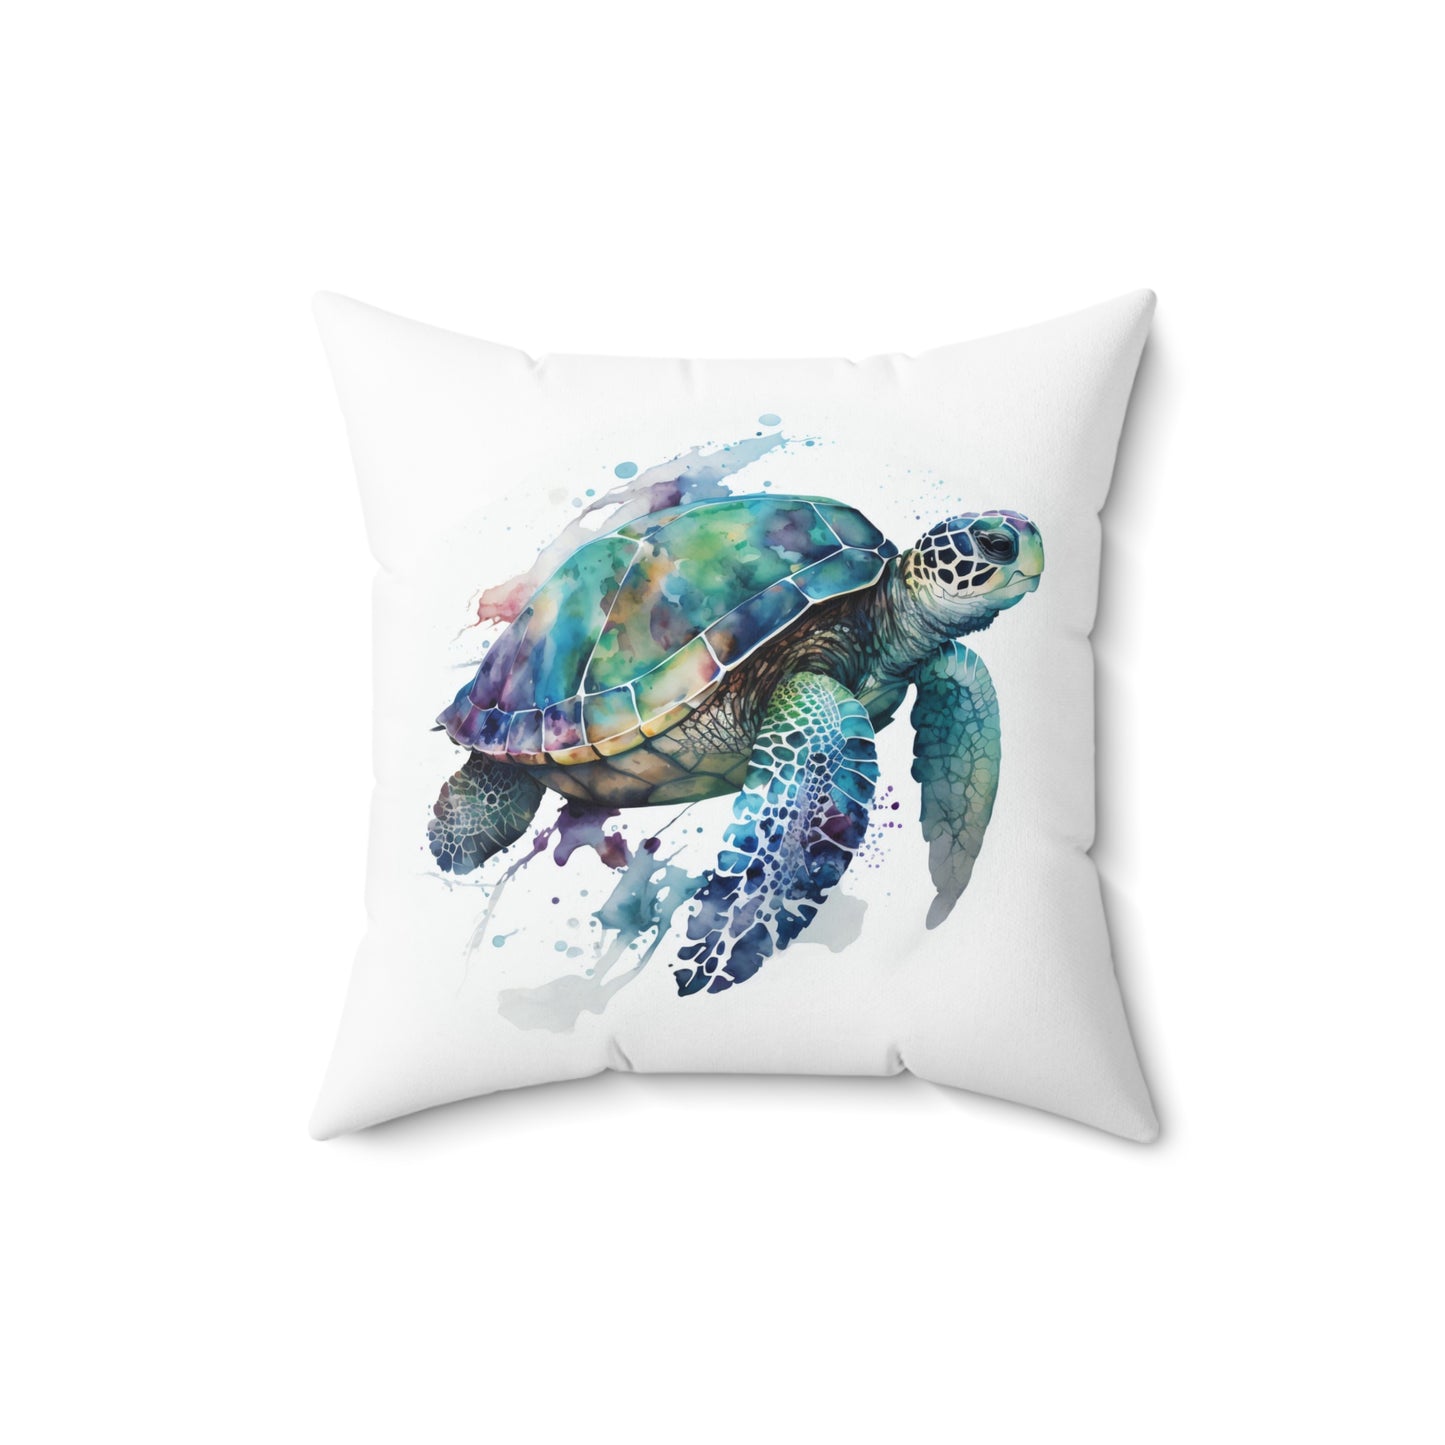 Sea Turtle Throw Pillow, Watercolor Sea Turtle Decorative Pillow, Square Animal Cushion, Double Sided Blue Accent Pillow, Concealed Zipper